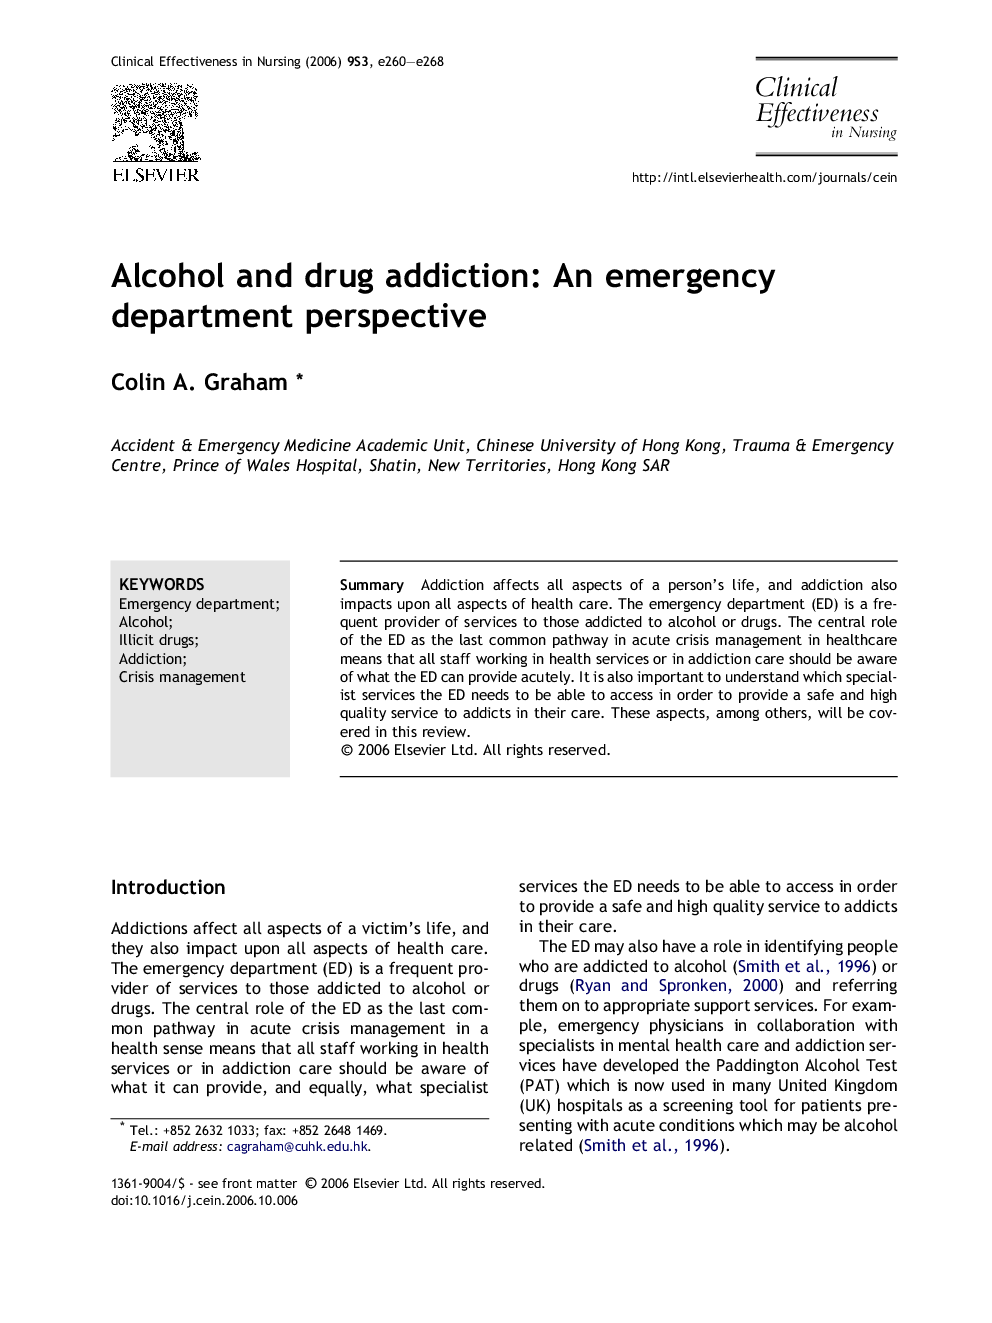 Alcohol and drug addiction: An emergency department perspective